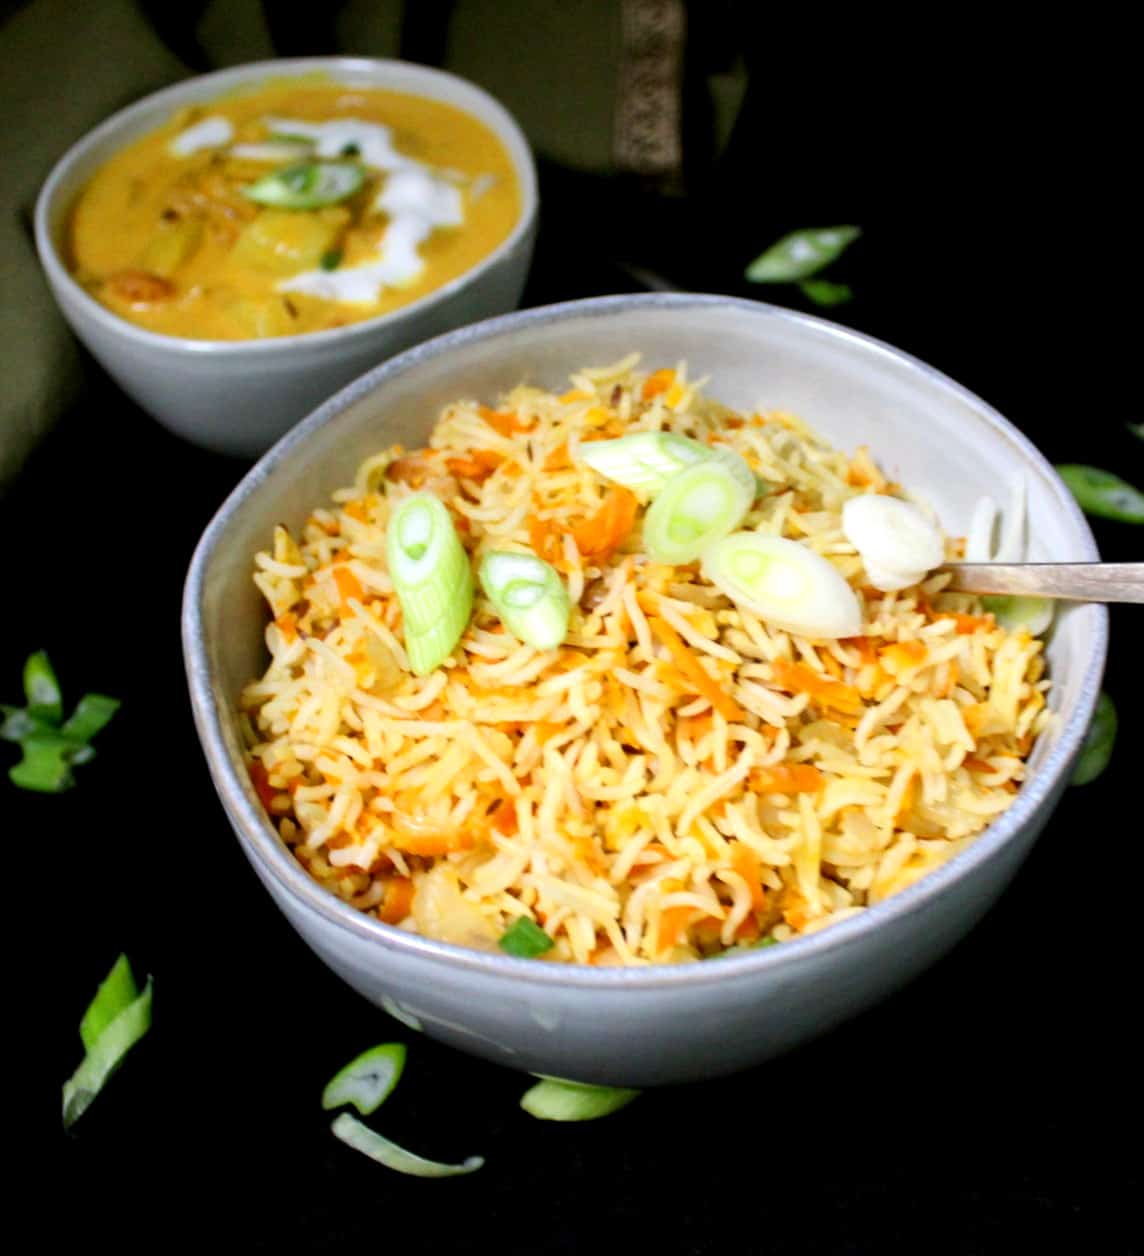 A bowl of carrot rice to be served with a coconut curry pictured in the background.